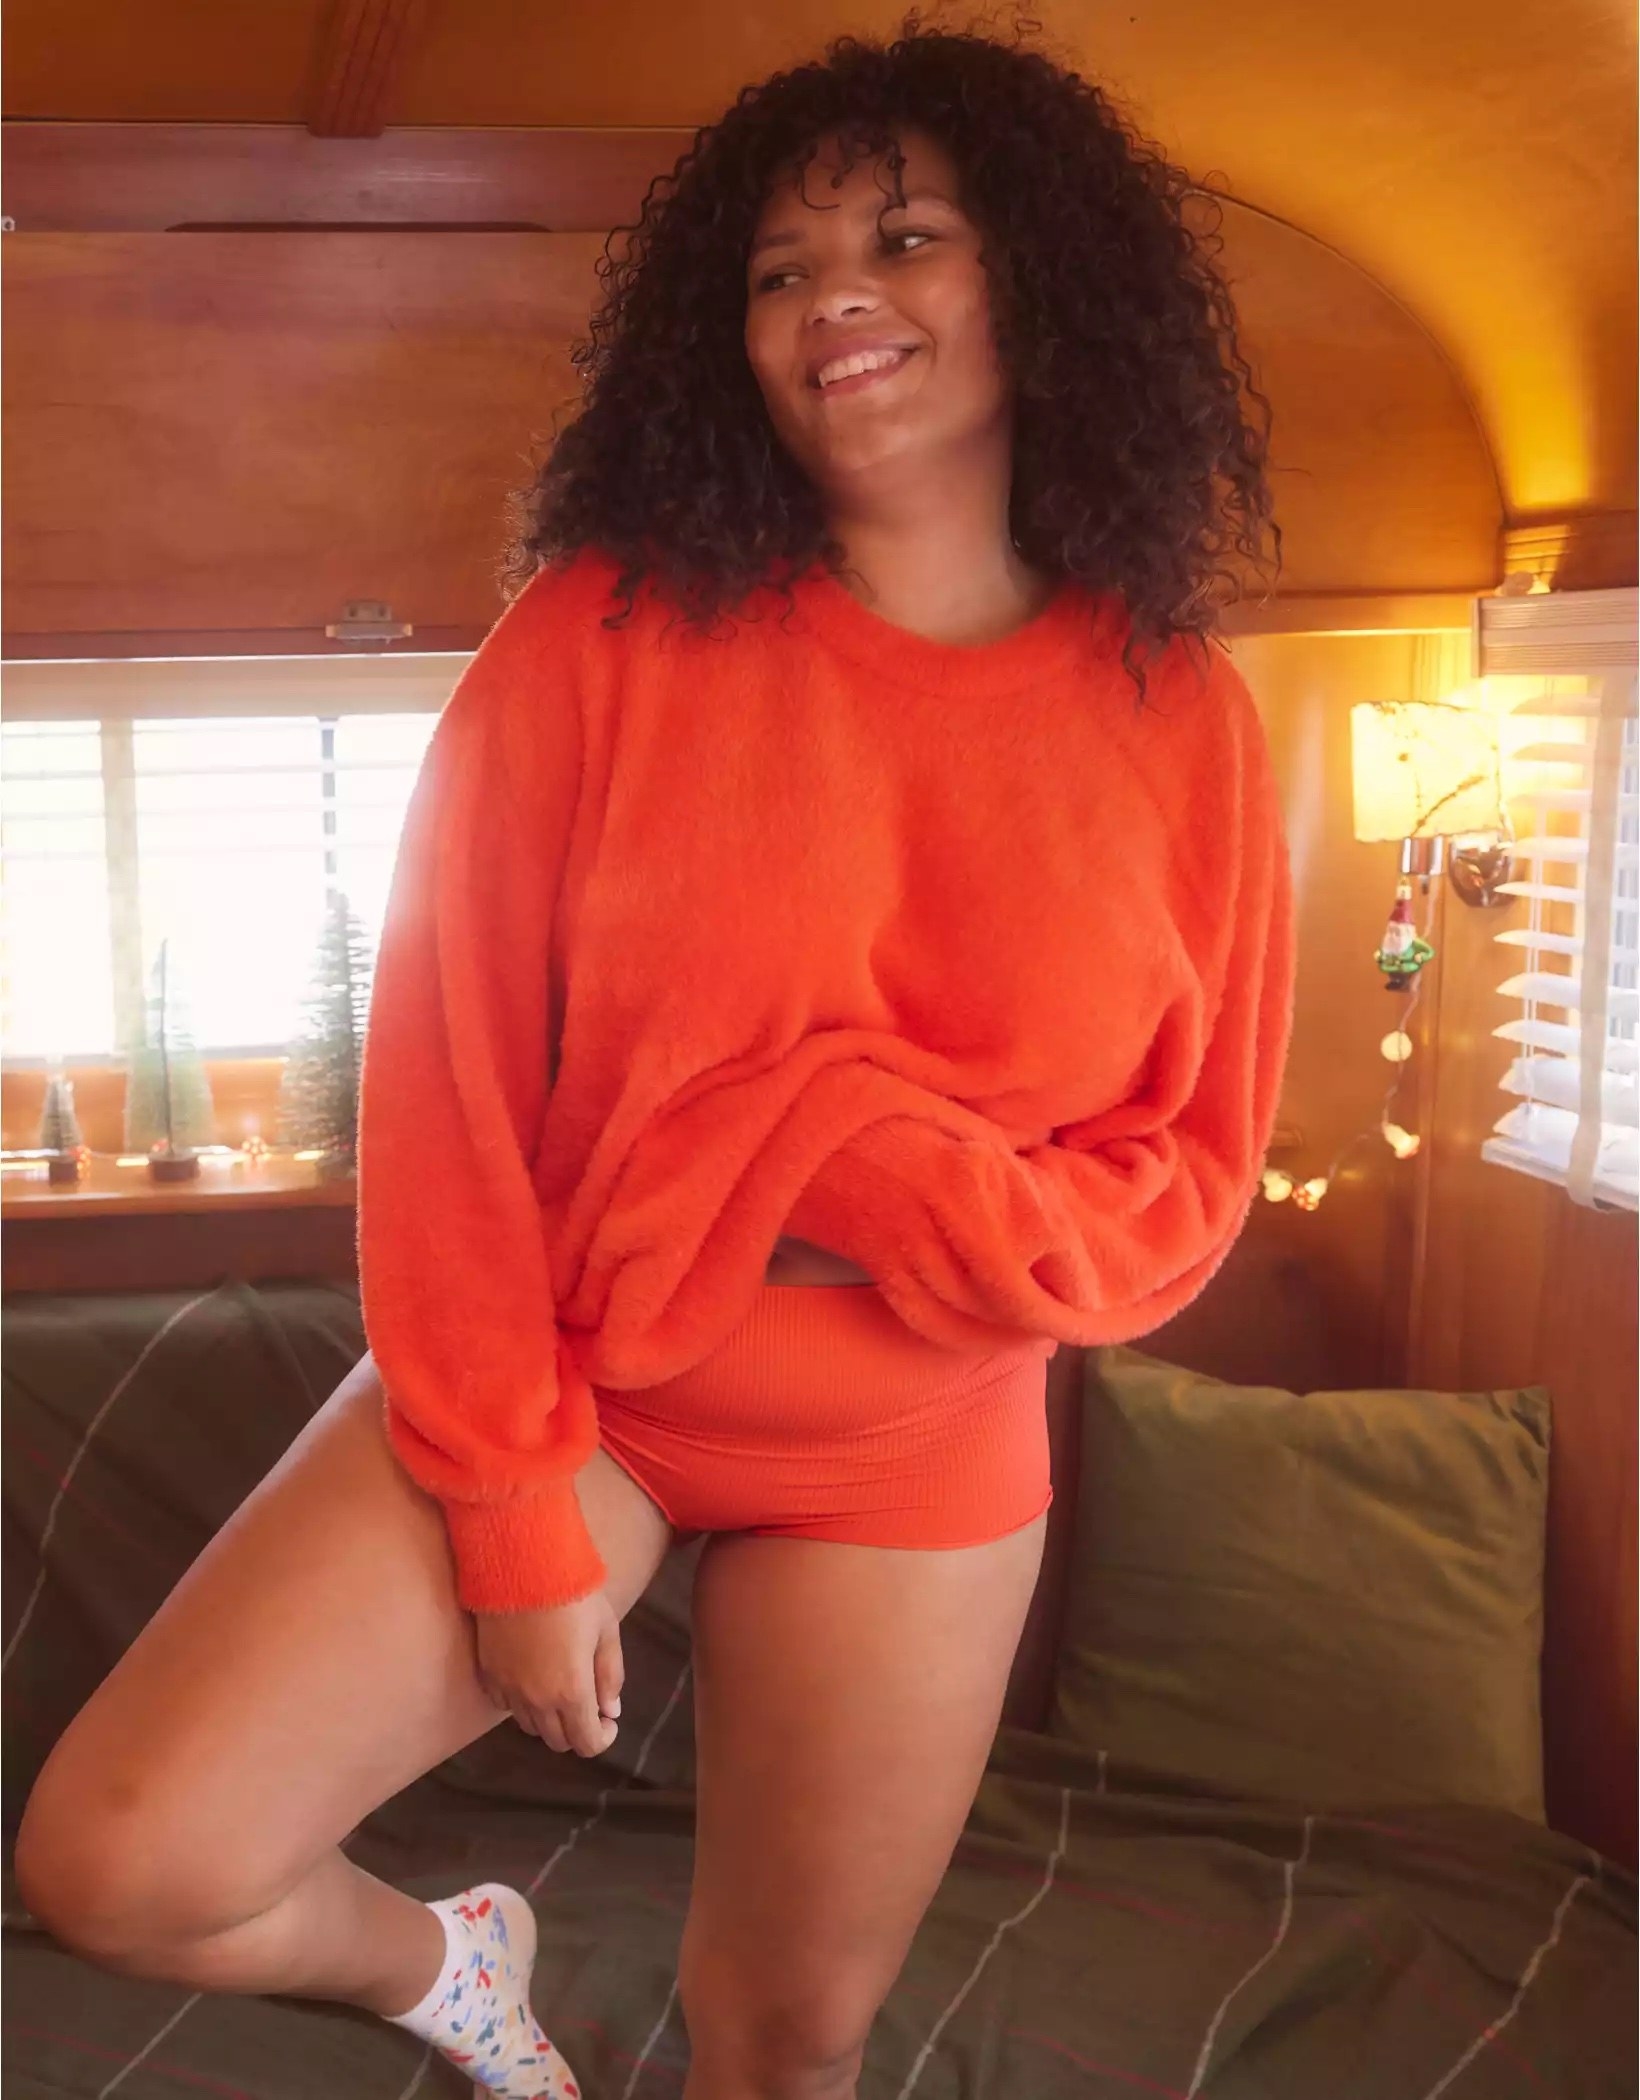 Model wearing bright orange top with bottoms